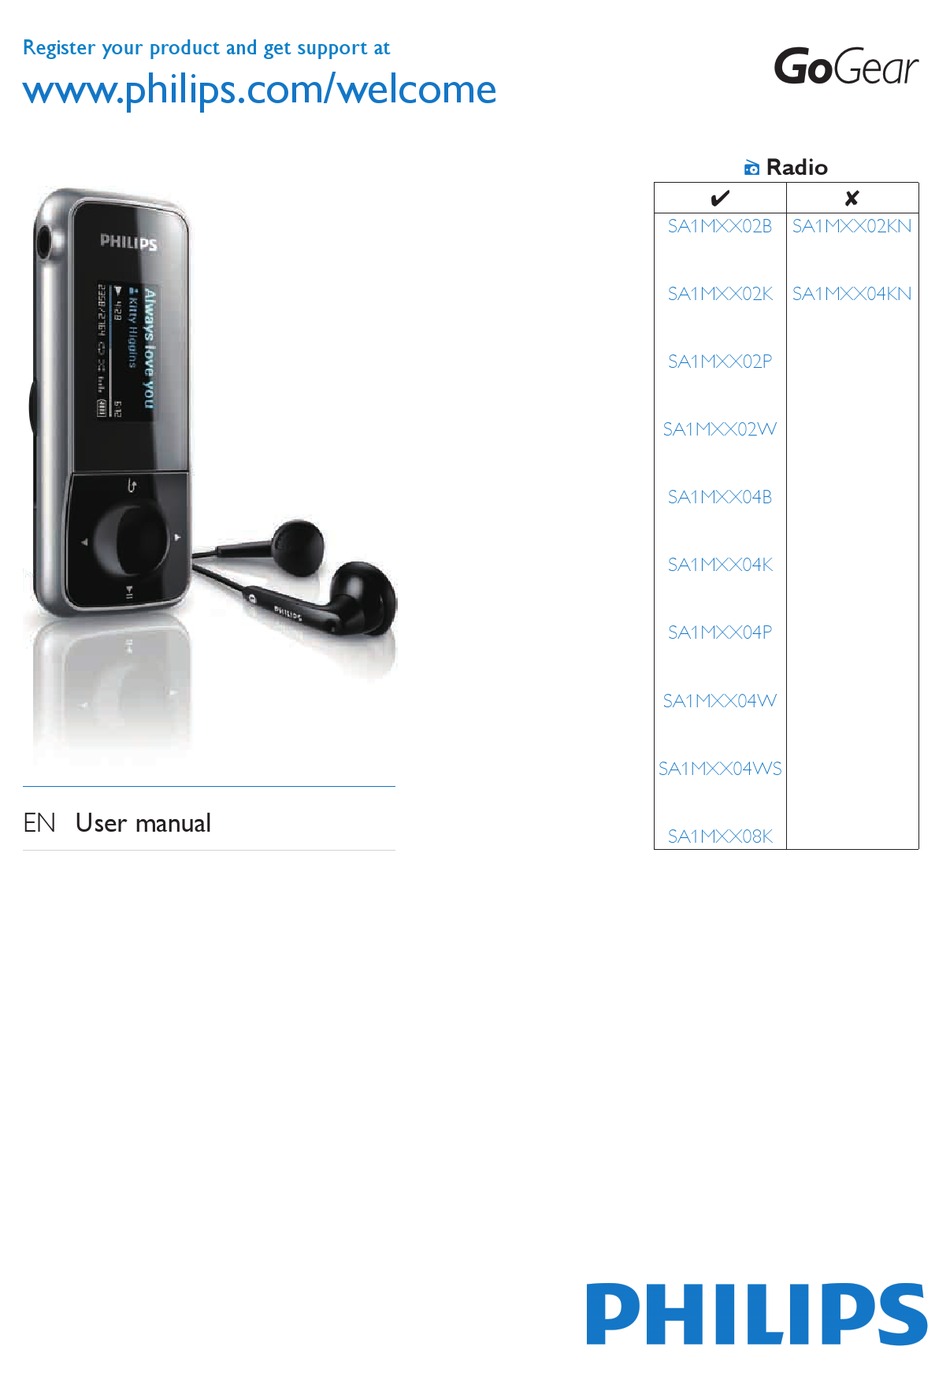 how to download music onto philips gogear mp3 player